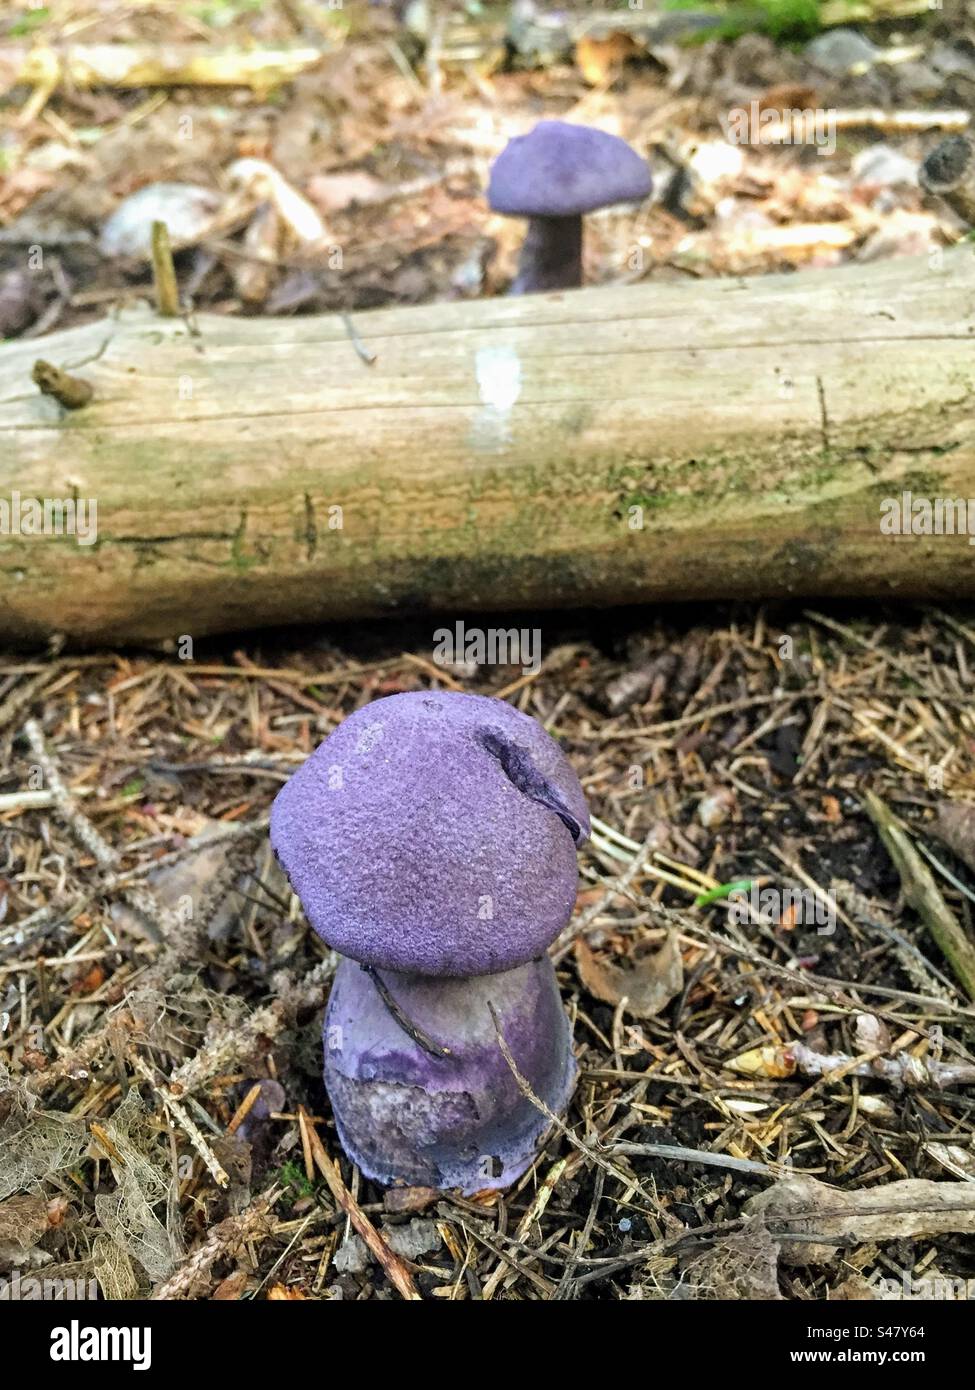 Two violet webcap cort cortinarius violaceus fungi mushrooms growing in the forest soil with thick dry branch trunk between Stock Photo